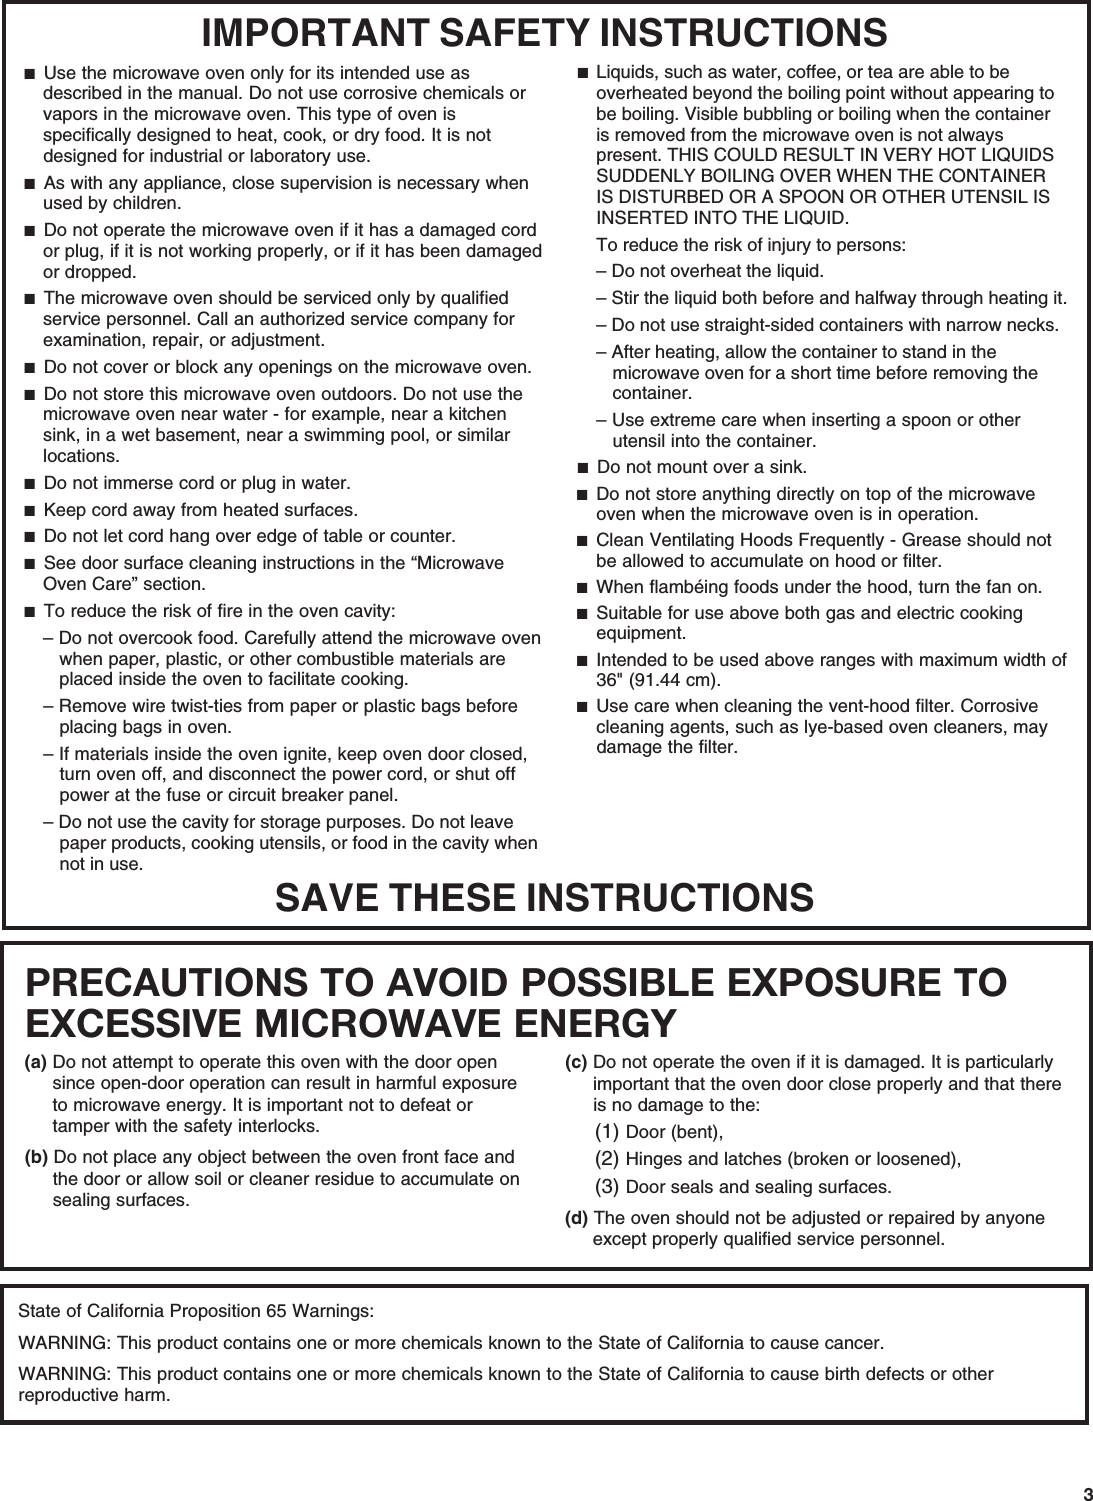 3PRECAUTIONS TO AVOID POSSIBLE EXPOSURE TO EXCESSIVE MICROWAVE ENERGY (a) Do not attempt to operate this oven with the door open since open-door operation can result in harmful exposure to microwave energy. It is important not to defeat or tamper with the safety interlocks.(b) Do not place any object between the oven front face and the door or allow soil or cleaner residue to accumulate on sealing surfaces.(c) Do not operate the oven if it is damaged. It is particularly important that the oven door close properly and that there is no damage to the:(1) Door (bent),(2) Hinges and latches (broken or loosened),(3) Door seals and sealing surfaces.  (d) The oven should not be adjusted or repaired by anyone except properly qualified service personnel.State of California Proposition 65 Warnings:WARNING: This product contains one or more chemicals known to the State of California to cause cancer.WARNING: This product contains one or more chemicals known to the State of California to cause birth defects or other reproductive harm.IMPORTANT SAFETY INSTRUCTIONSSAVE THESE INSTRUCTIONS■  Use the microwave oven only for its intended use as described in the manual. Do not use corrosive chemicals or vapors in the microwave oven. This type of oven is specifically designed to heat, cook, or dry food. It is not designed for industrial or laboratory use. ■  As with any appliance, close supervision is necessary when used by children. ■  Do not operate the microwave oven if it has a damaged cord or plug, if it is not working properly, or if it has been damaged or dropped.■  The microwave oven should be serviced only by qualified service personnel. Call an authorized service company for examination, repair, or adjustment. ■  Do not cover or block any openings on the microwave oven. ■  Do not store this microwave oven outdoors. Do not use the microwave oven near water - for example, near a kitchen sink, in a wet basement, near a swimming pool, or similar locations.■  Do not immerse cord or plug in water. ■  Keep cord away from heated surfaces. ■  Do not let cord hang over edge of table or counter. ■  See door surface cleaning instructions in the “Microwave Oven Care” section.■  To reduce the risk of fire in the oven cavity:– Do not overcook food. Carefully attend the microwave oven when paper, plastic, or other combustible materials are placed inside the oven to facilitate cooking. – Remove wire twist-ties from paper or plastic bags before placing bags in oven.– If materials inside the oven ignite, keep oven door closed, turn oven off, and disconnect the power cord, or shut off power at the fuse or circuit breaker panel.– Do not use the cavity for storage purposes. Do not leave paper products, cooking utensils, or food in the cavity when not in use.■  Liquids, such as water, coffee, or tea are able to be overheated beyond the boiling point without appearing to be boiling. Visible bubbling or boiling when the container is removed from the microwave oven is not always present. THIS COULD RESULT IN VERY HOT LIQUIDS SUDDENLY BOILING OVER WHEN THE CONTAINER IS DISTURBED OR A SPOON OR OTHER UTENSIL IS INSERTED INTO THE LIQUID. To reduce the risk of injury to persons:– Do not overheat the liquid.– Stir the liquid both before and halfway through heating it.– Do not use straight-sided containers with narrow necks.– After heating, allow the container to stand in the microwave oven for a short time before removing the container.– Use extreme care when inserting a spoon or other utensil into the container.■  Do not mount over a sink. ■  Do not store anything directly on top of the microwave oven when the microwave oven is in operation.■  Clean Ventilating Hoods Frequently - Grease should not be allowed to accumulate on hood or filter.  ■  When flambéing foods under the hood, turn the fan on. ■  Suitable for use above both gas and electric cooking equipment.■  Intended to be used above ranges with maximum width of 36&quot; (91.44 cm).■  Use care when cleaning the vent-hood filter. Corrosive cleaning agents, such as lye-based oven cleaners, may damage the filter.